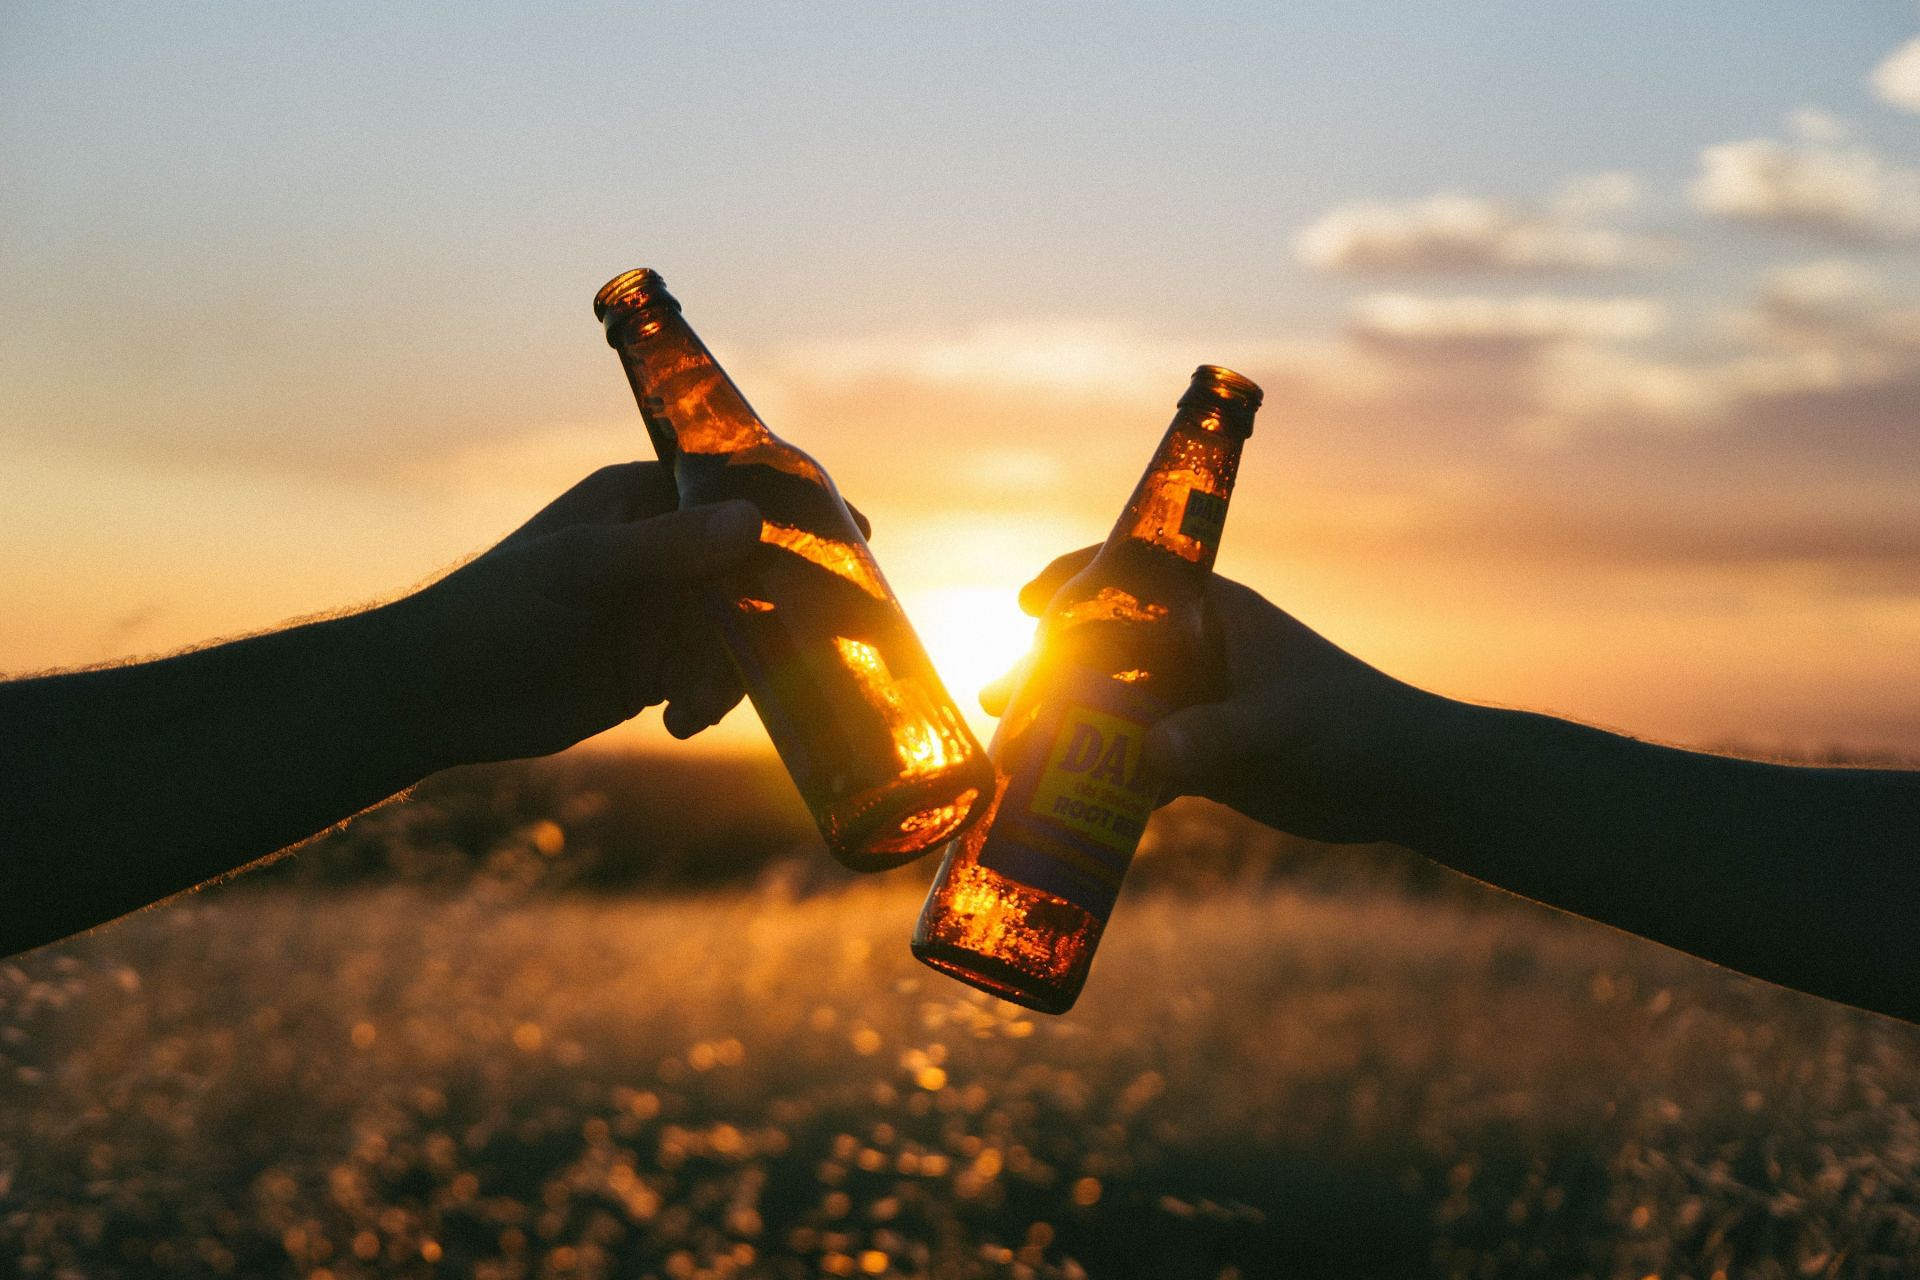 Excessive alcohol consumption is a factor in aging ahead of time. (Image via Unsplash/Wil Stewart)